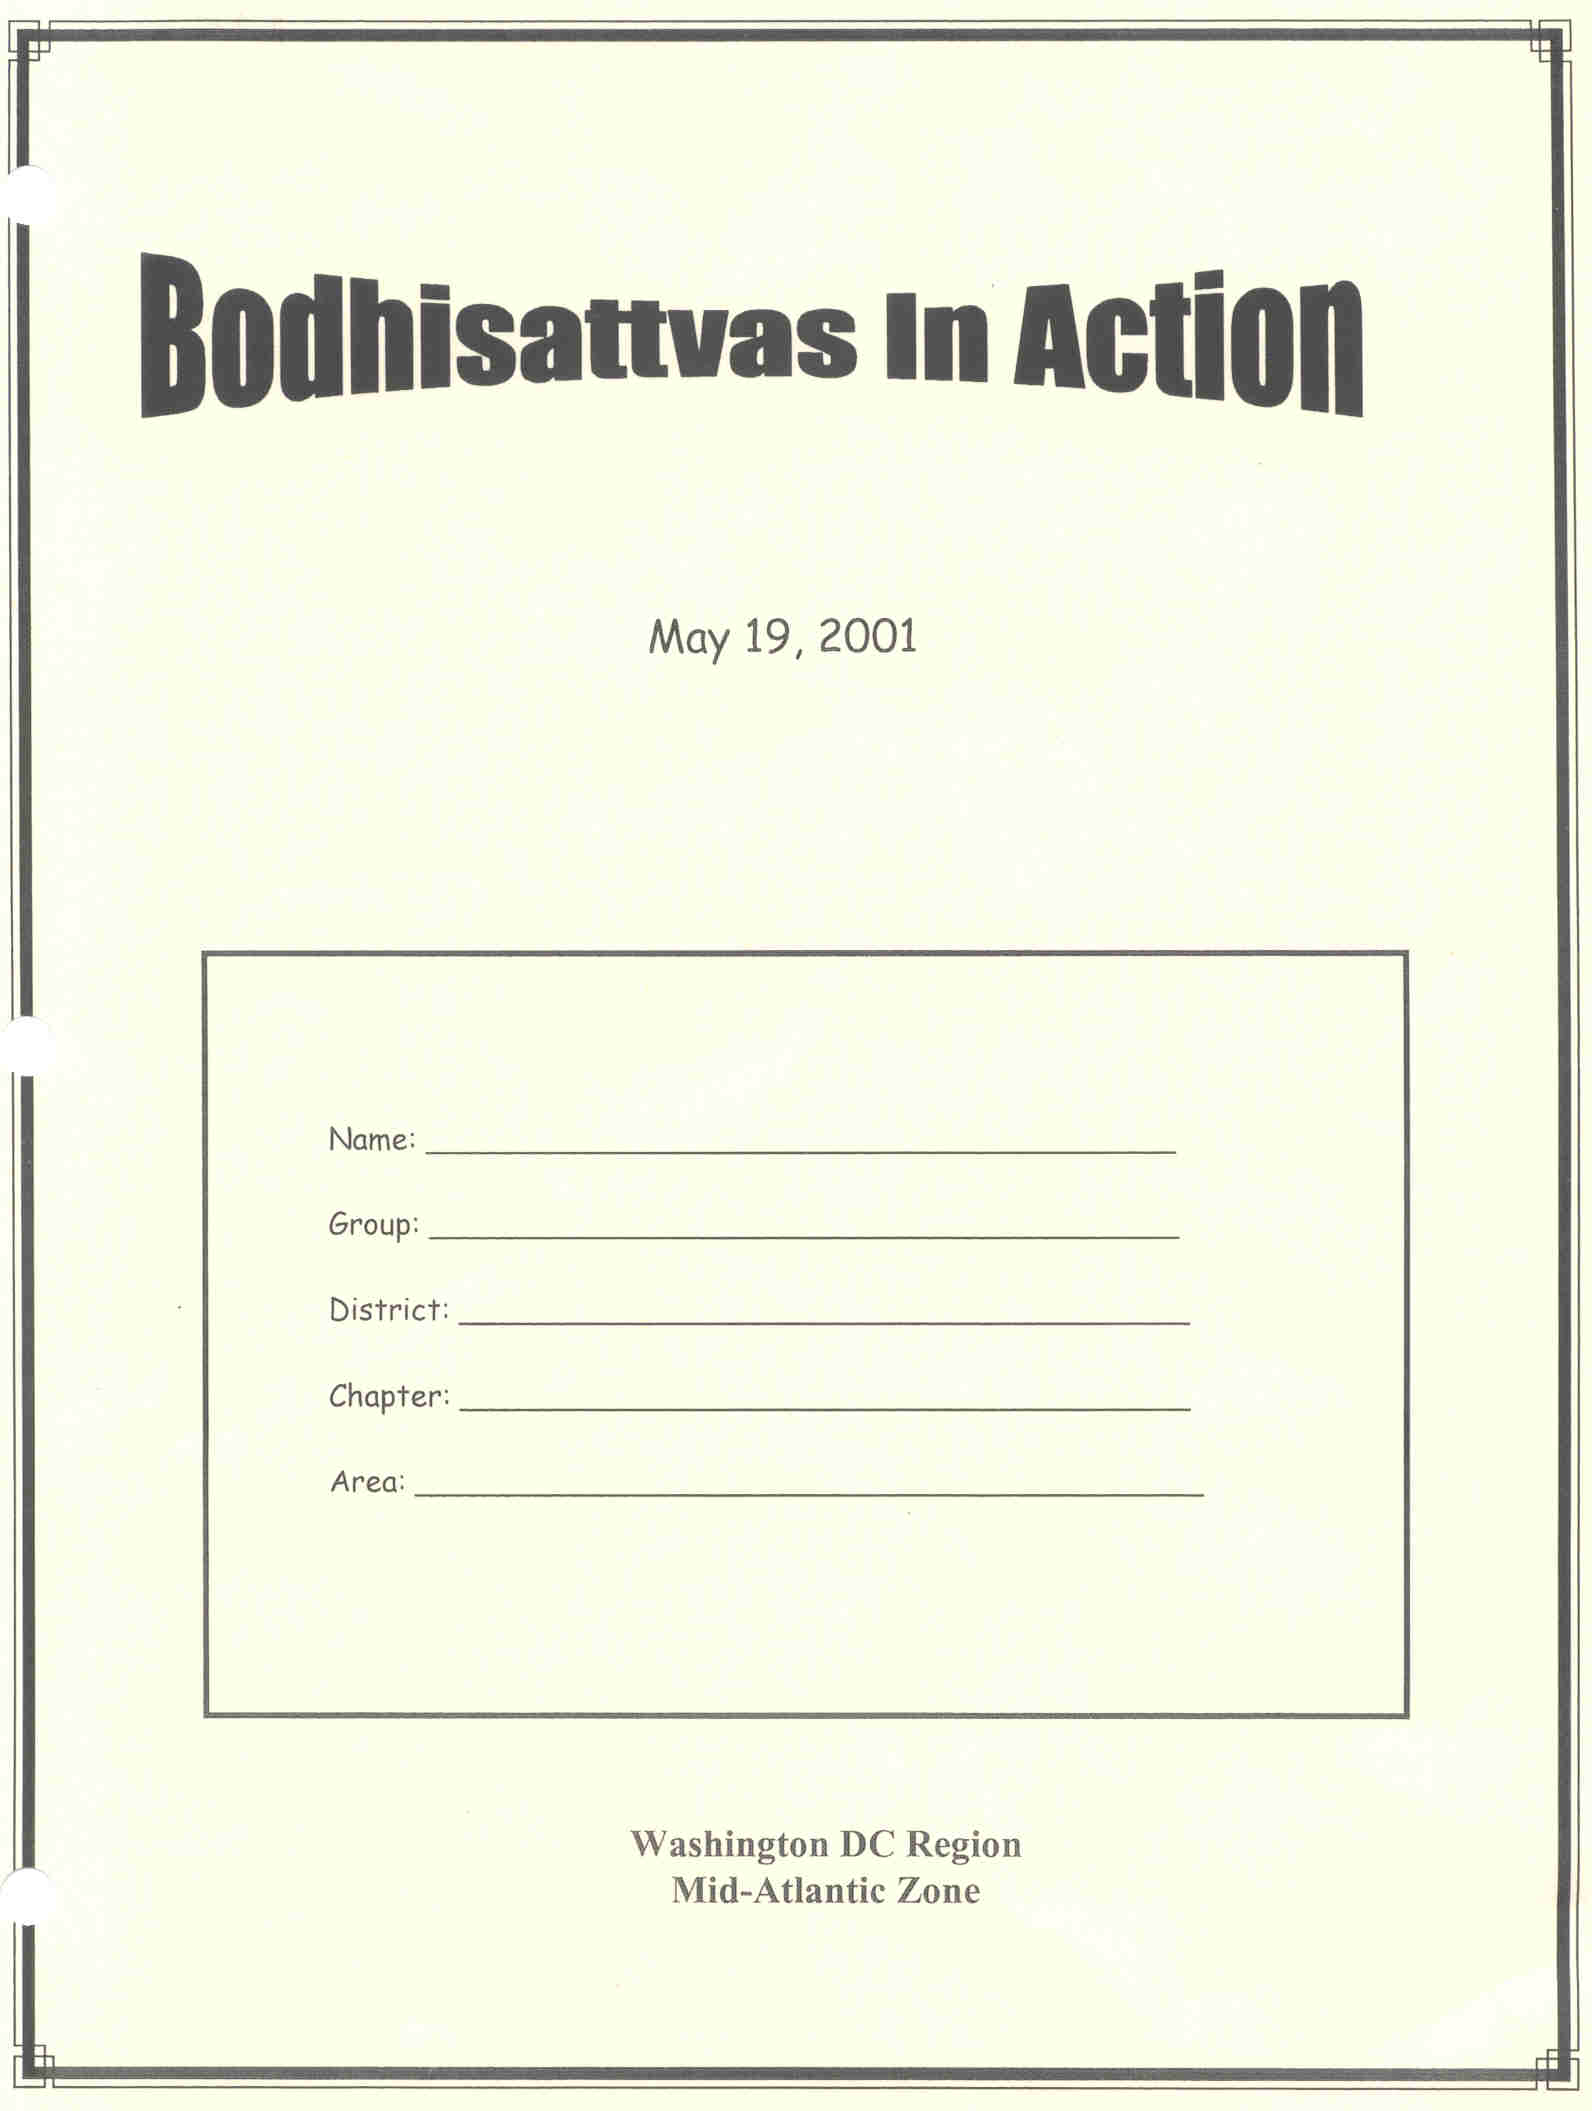 Cover to goto BODIACS text dated 19 May 2001